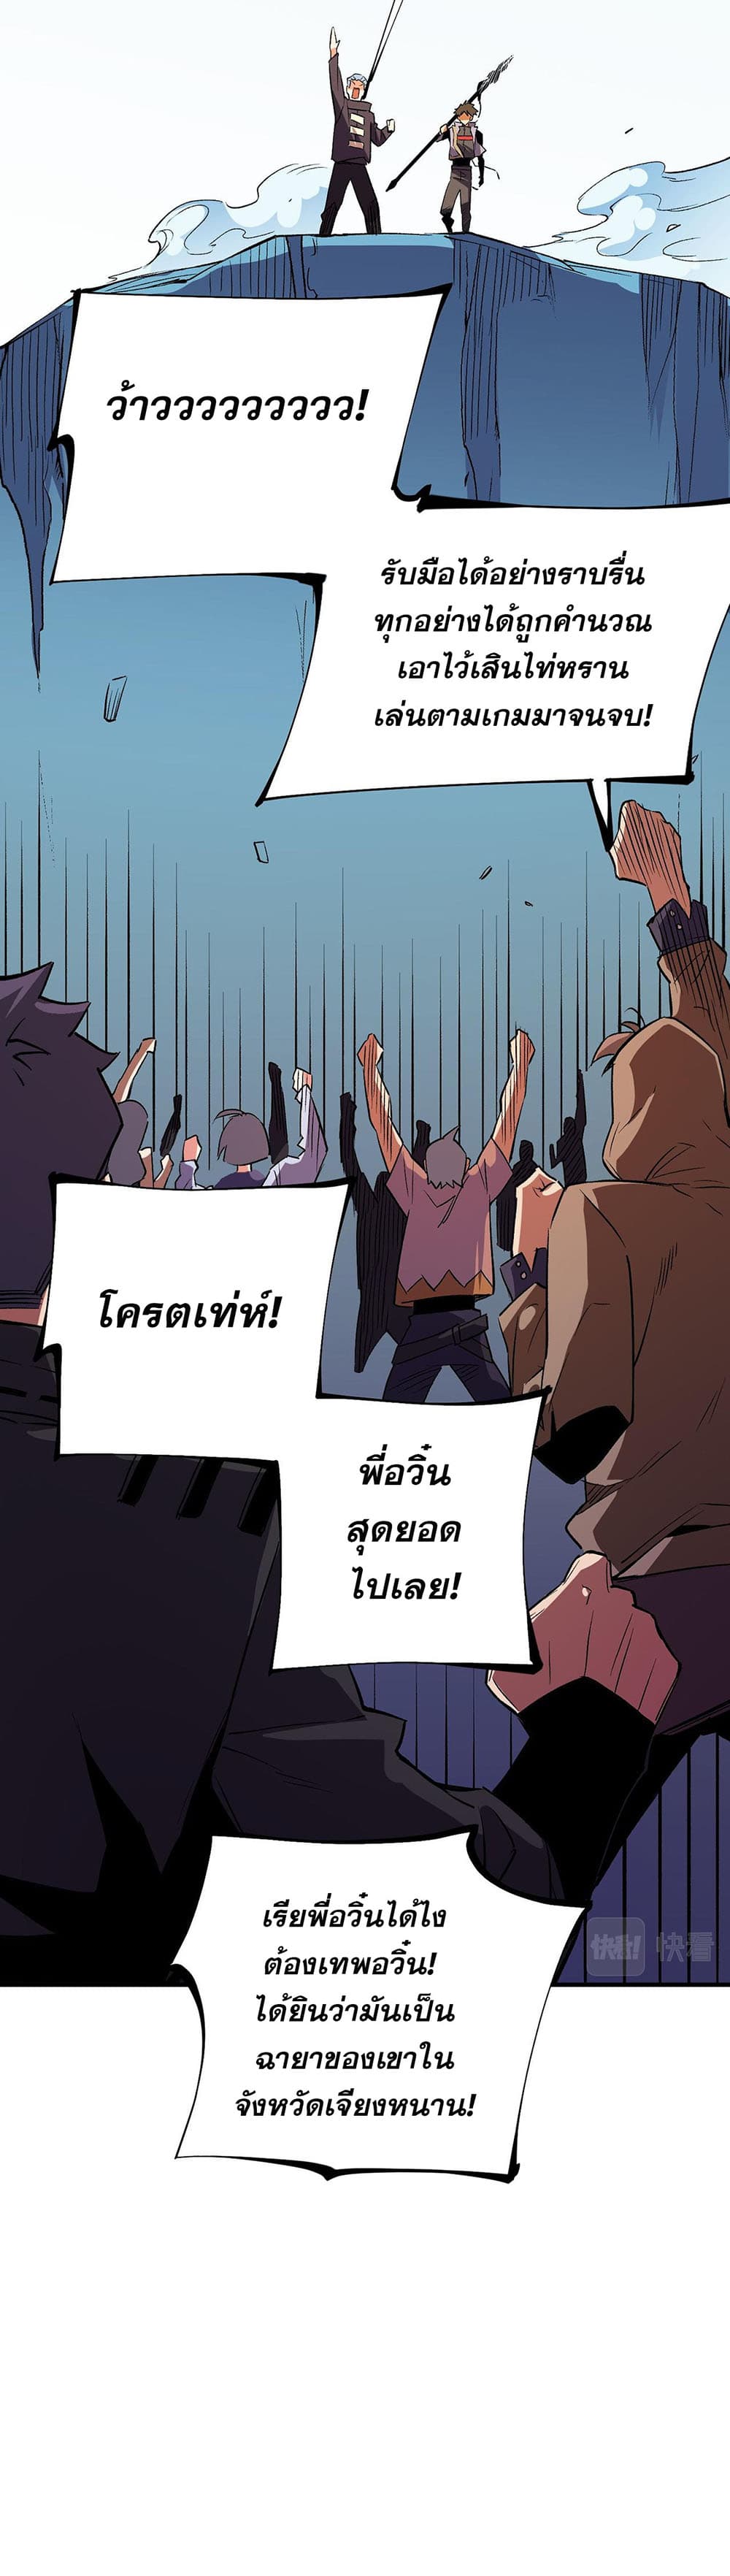 Job Changing for the Entire Population: The Jobless Me Will Terminate the Gods ฉันคือผู้เล่นไร้อาชีพที่สังหารเหล่าเทพ 17-17